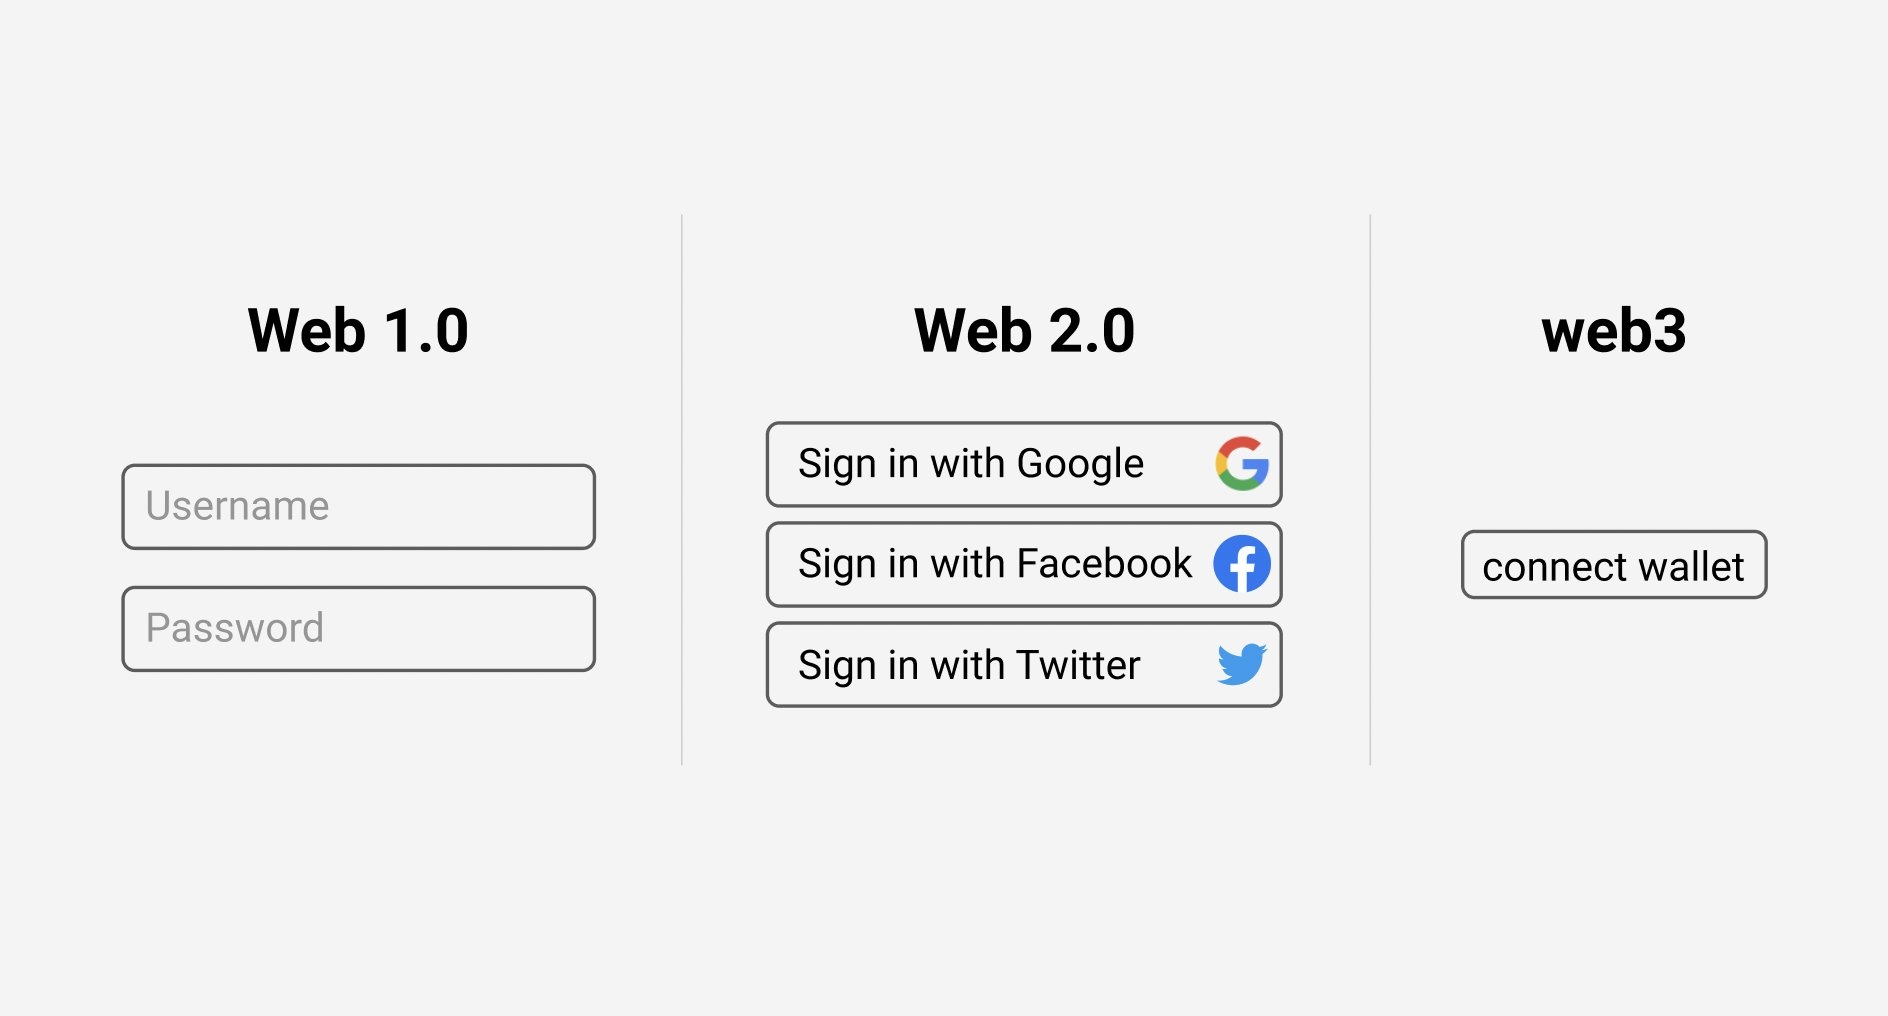 Logging in to web3 website means connecting your wallet.